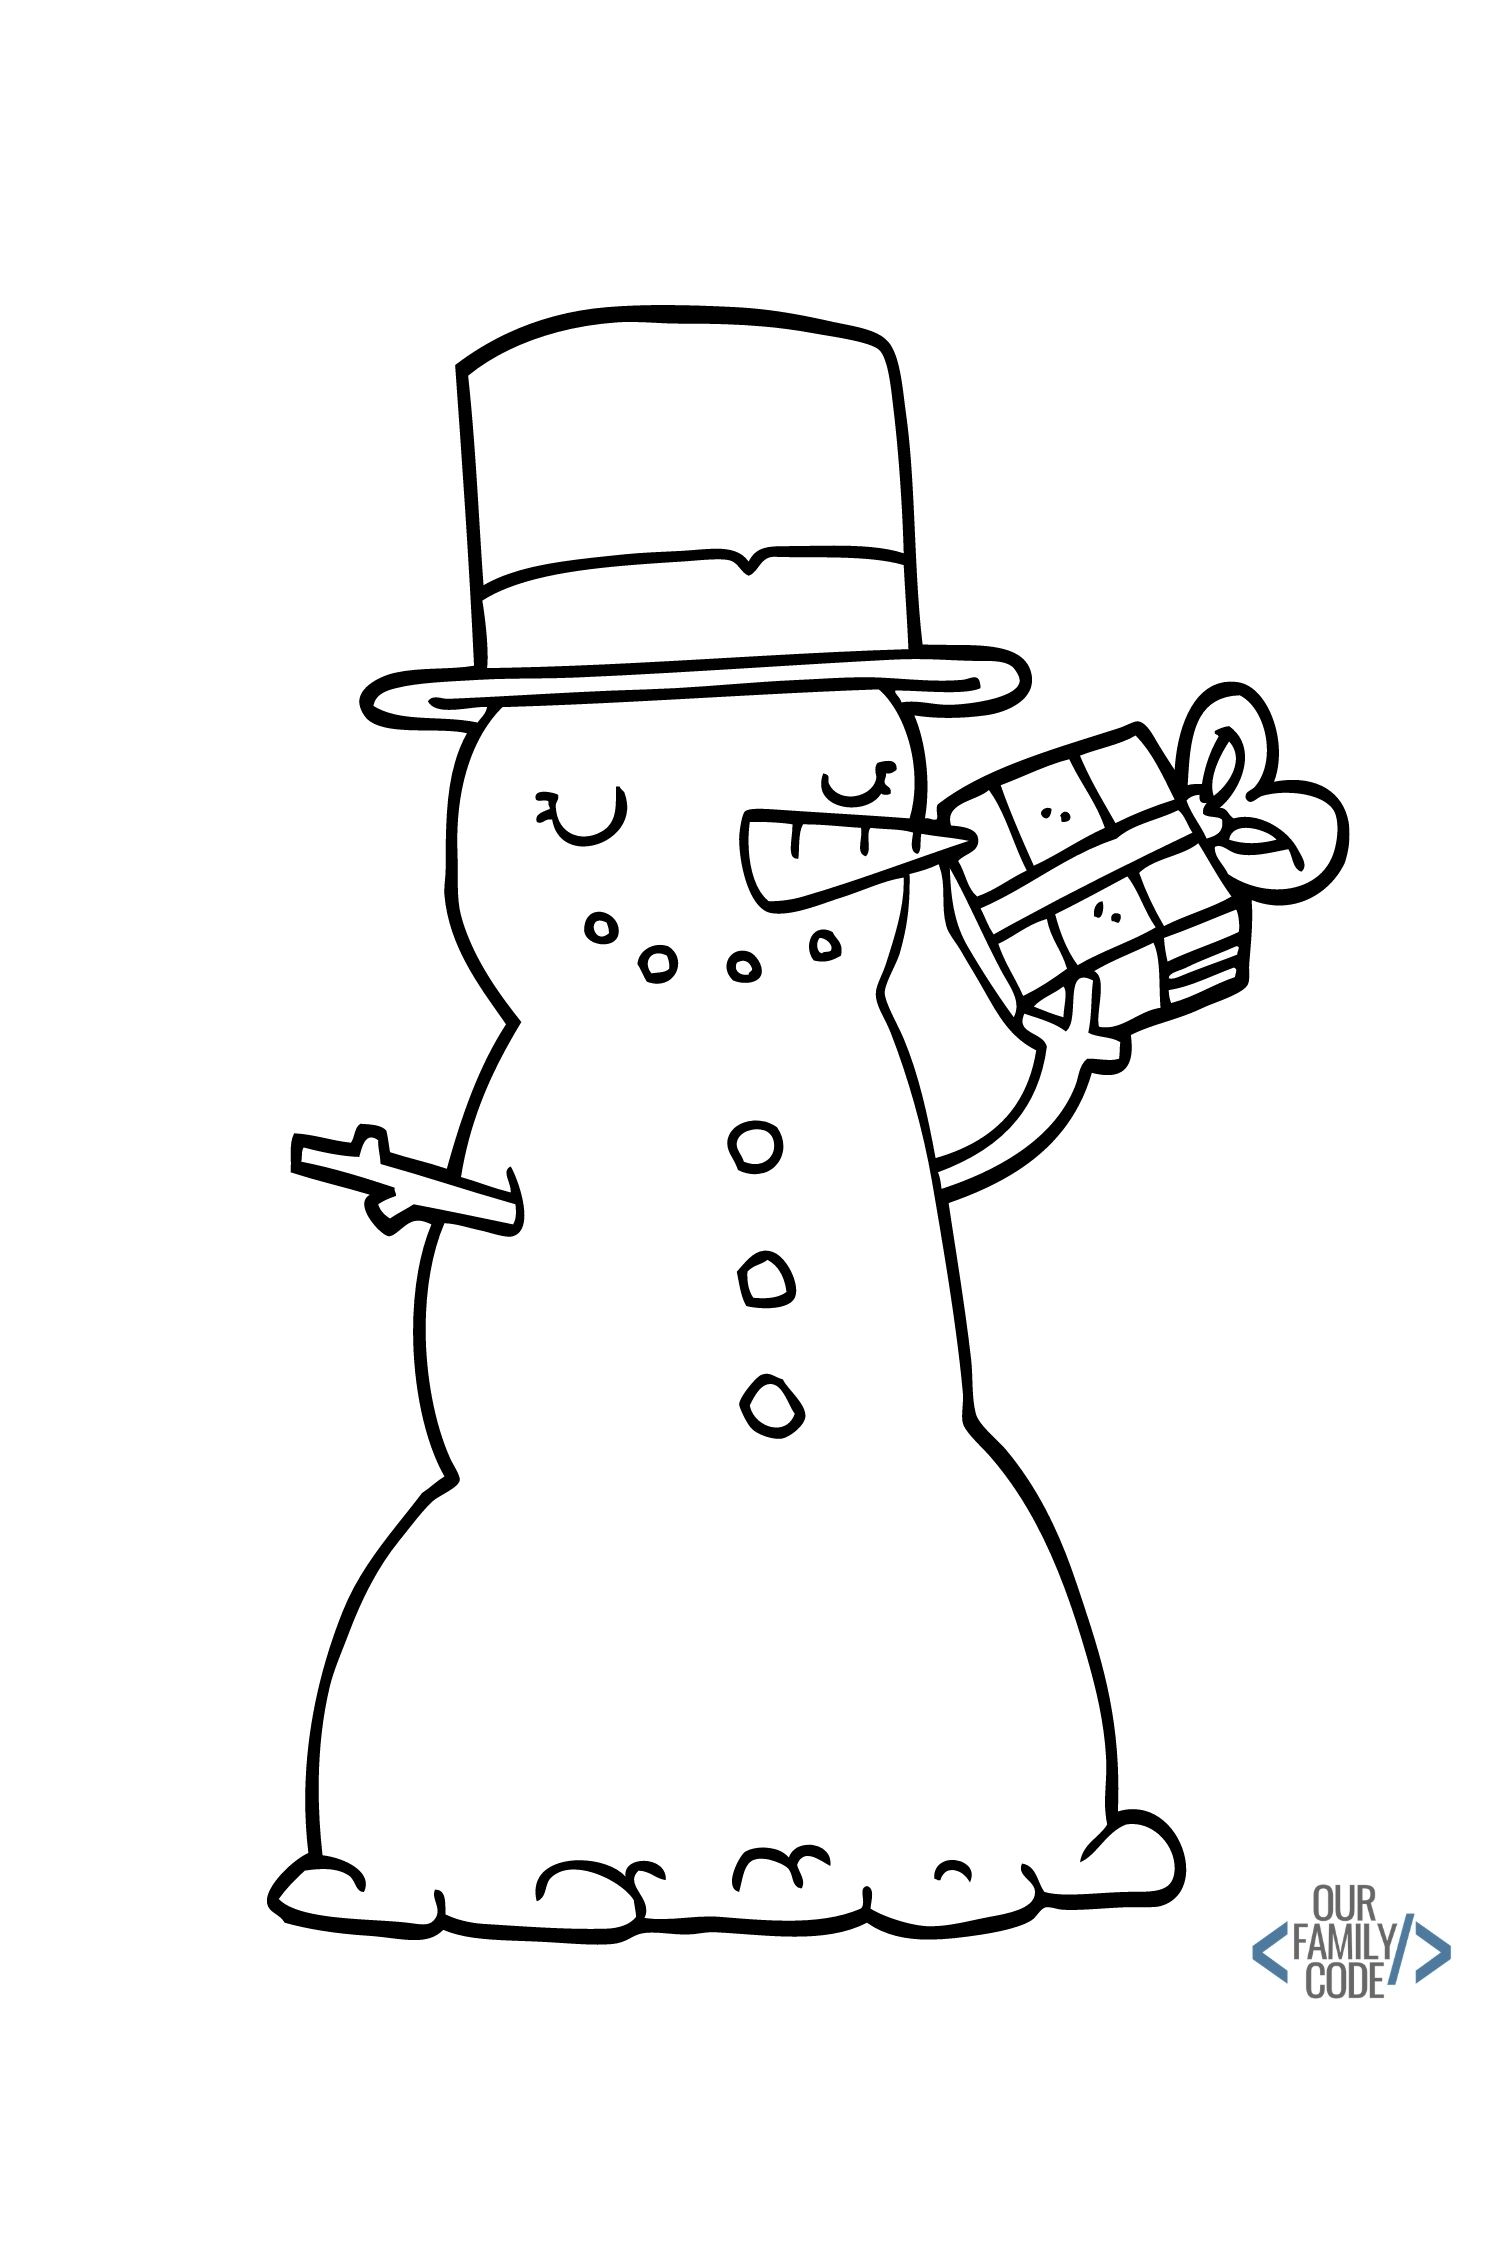 12 days of Free Christmas Worksheets for Kids Free Download Snowman Coloring Page